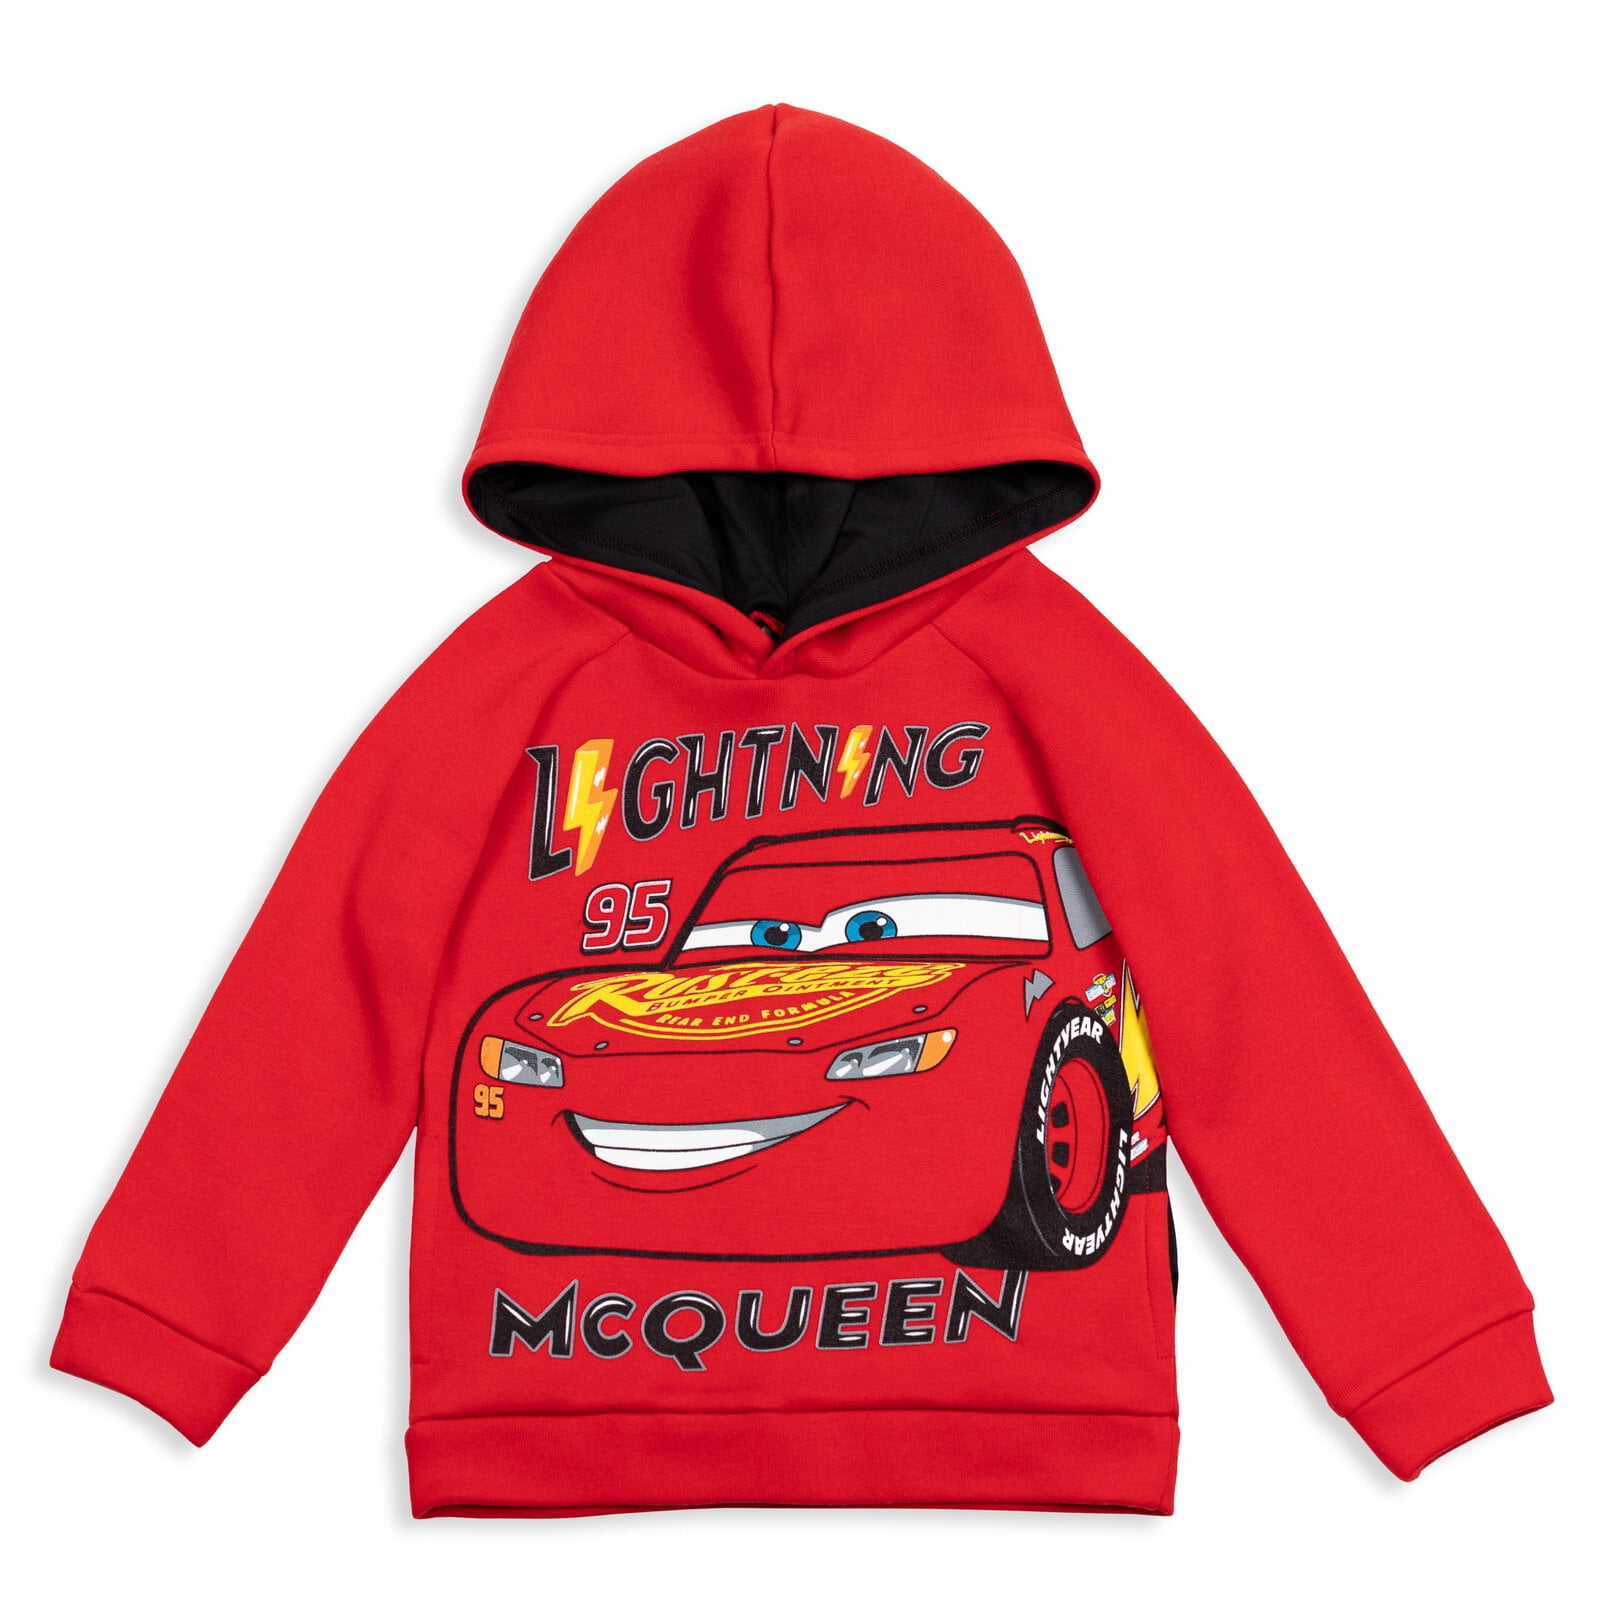  Disney Pixar Cars Lightning McQueen Toddler Boys Winter Coat  Puffer Jacket Red 2T: Clothing, Shoes & Jewelry